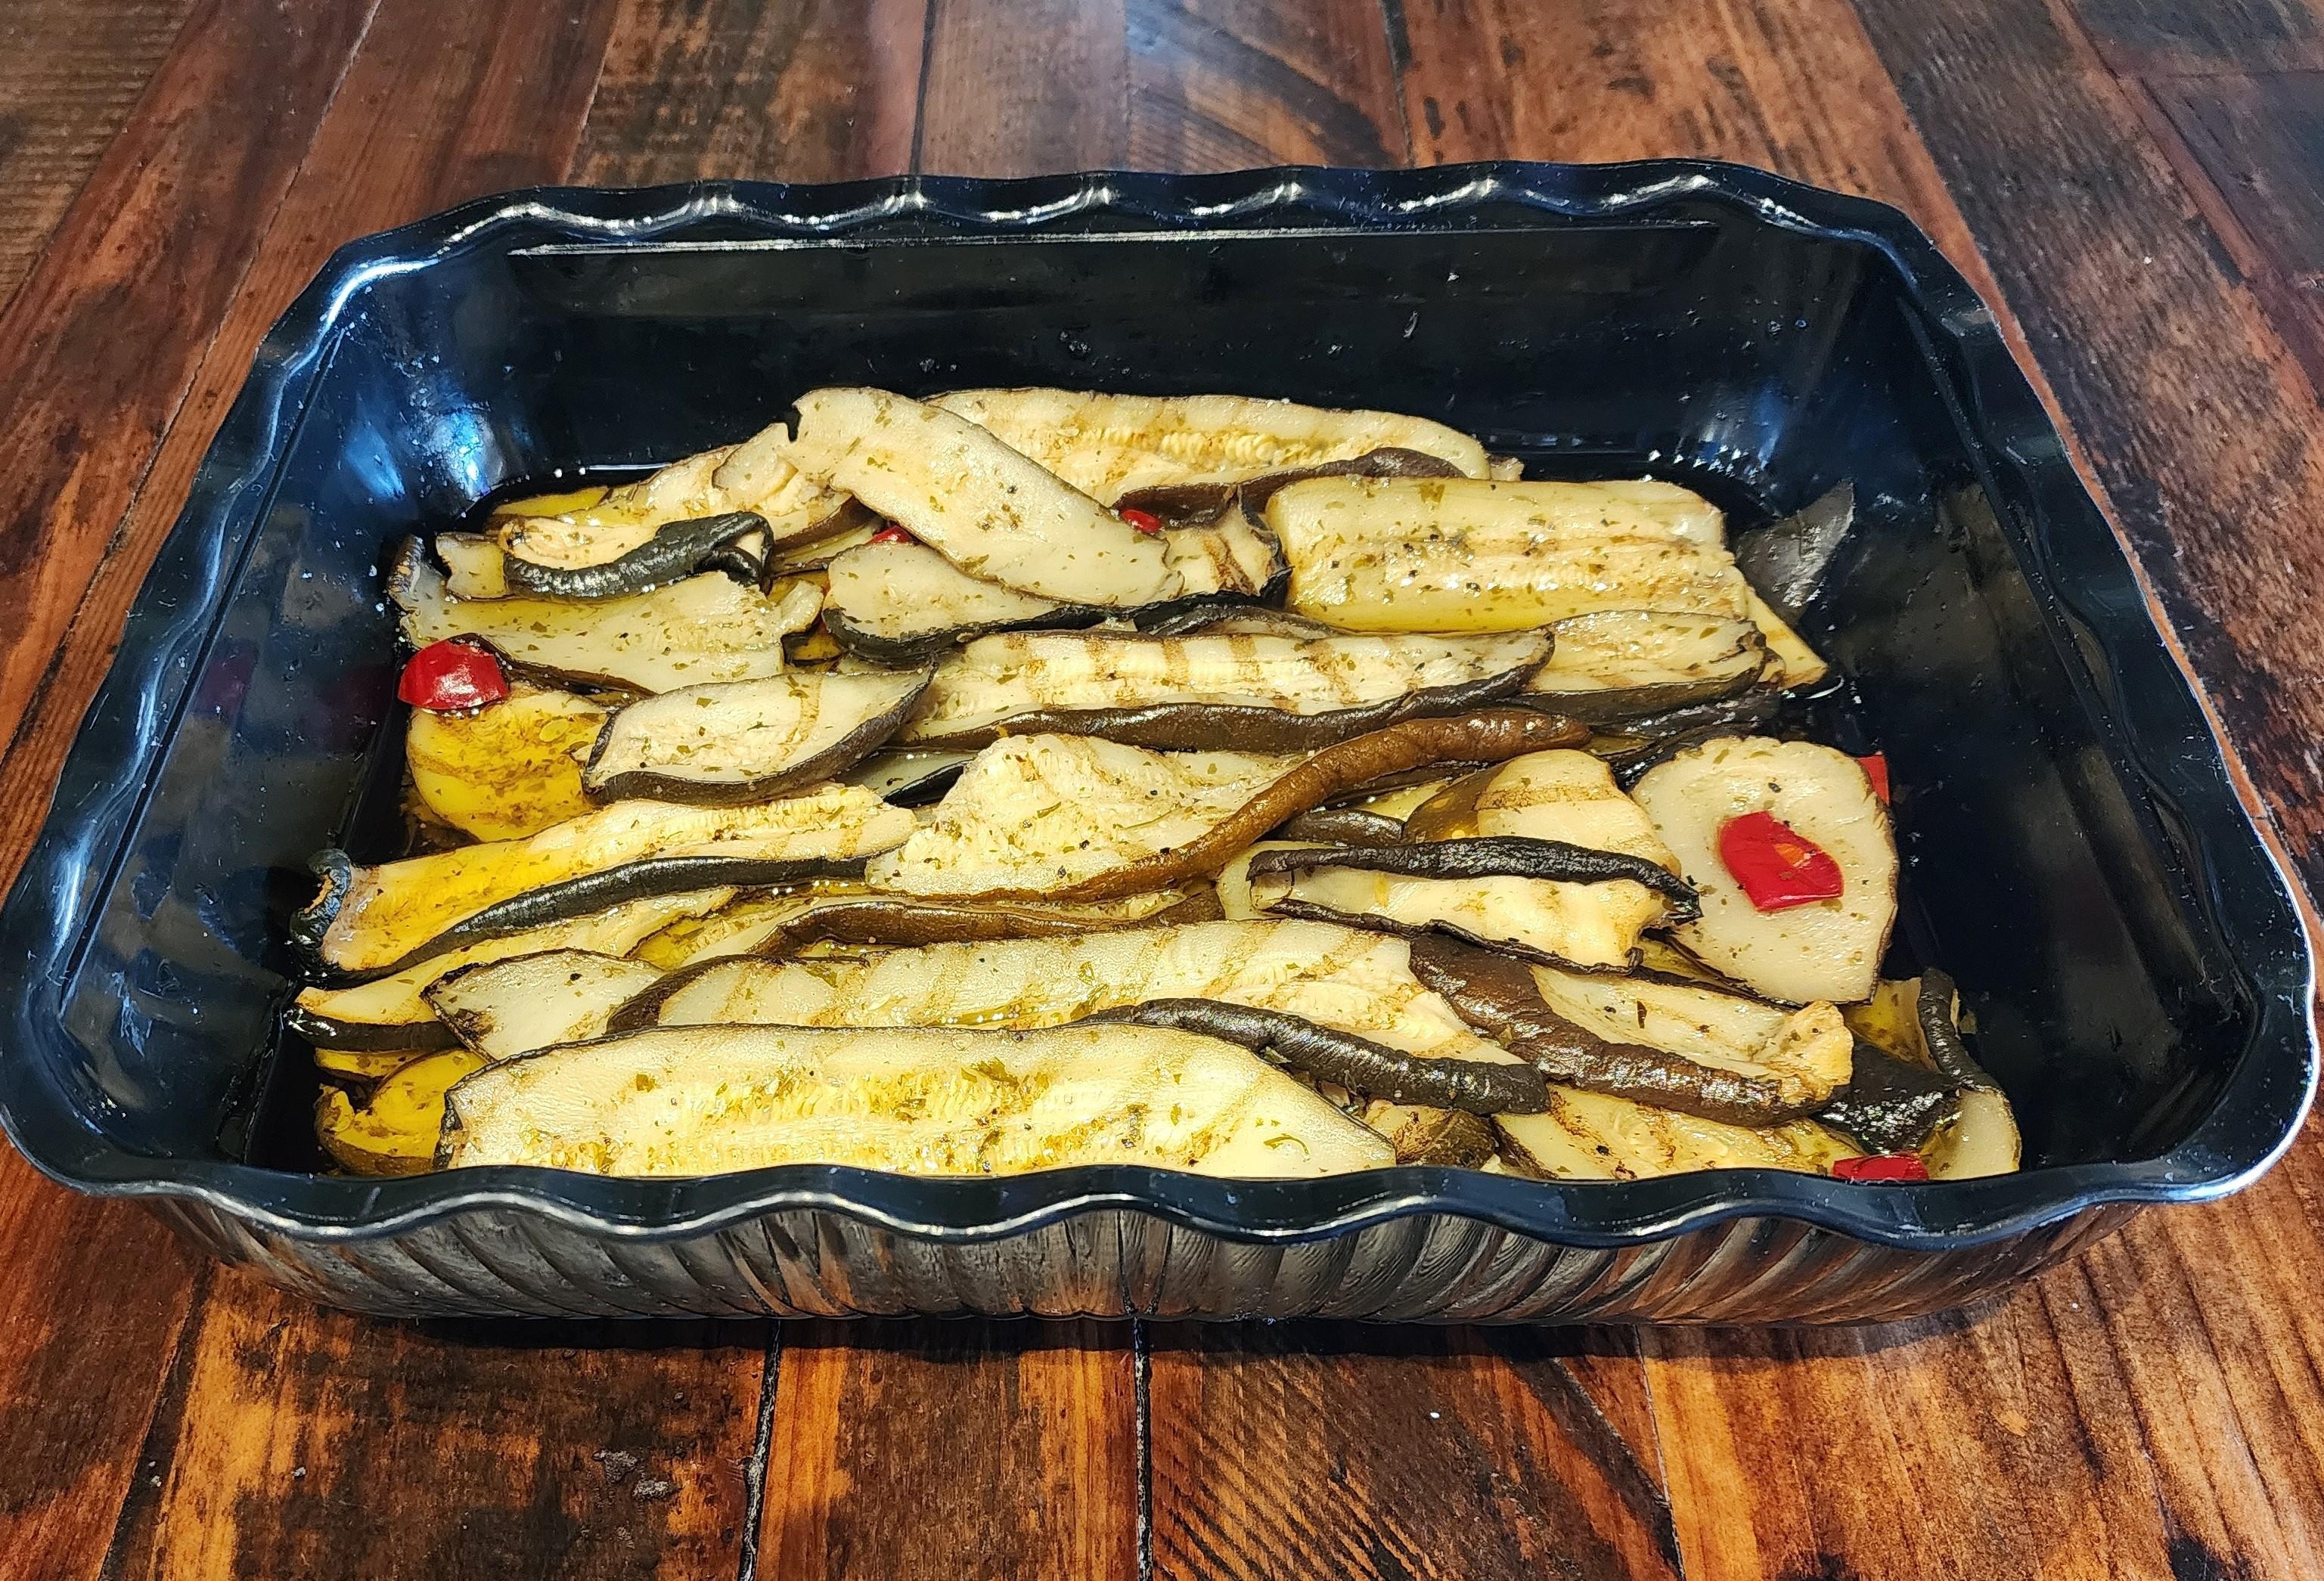 Grilled Zucchini - Large